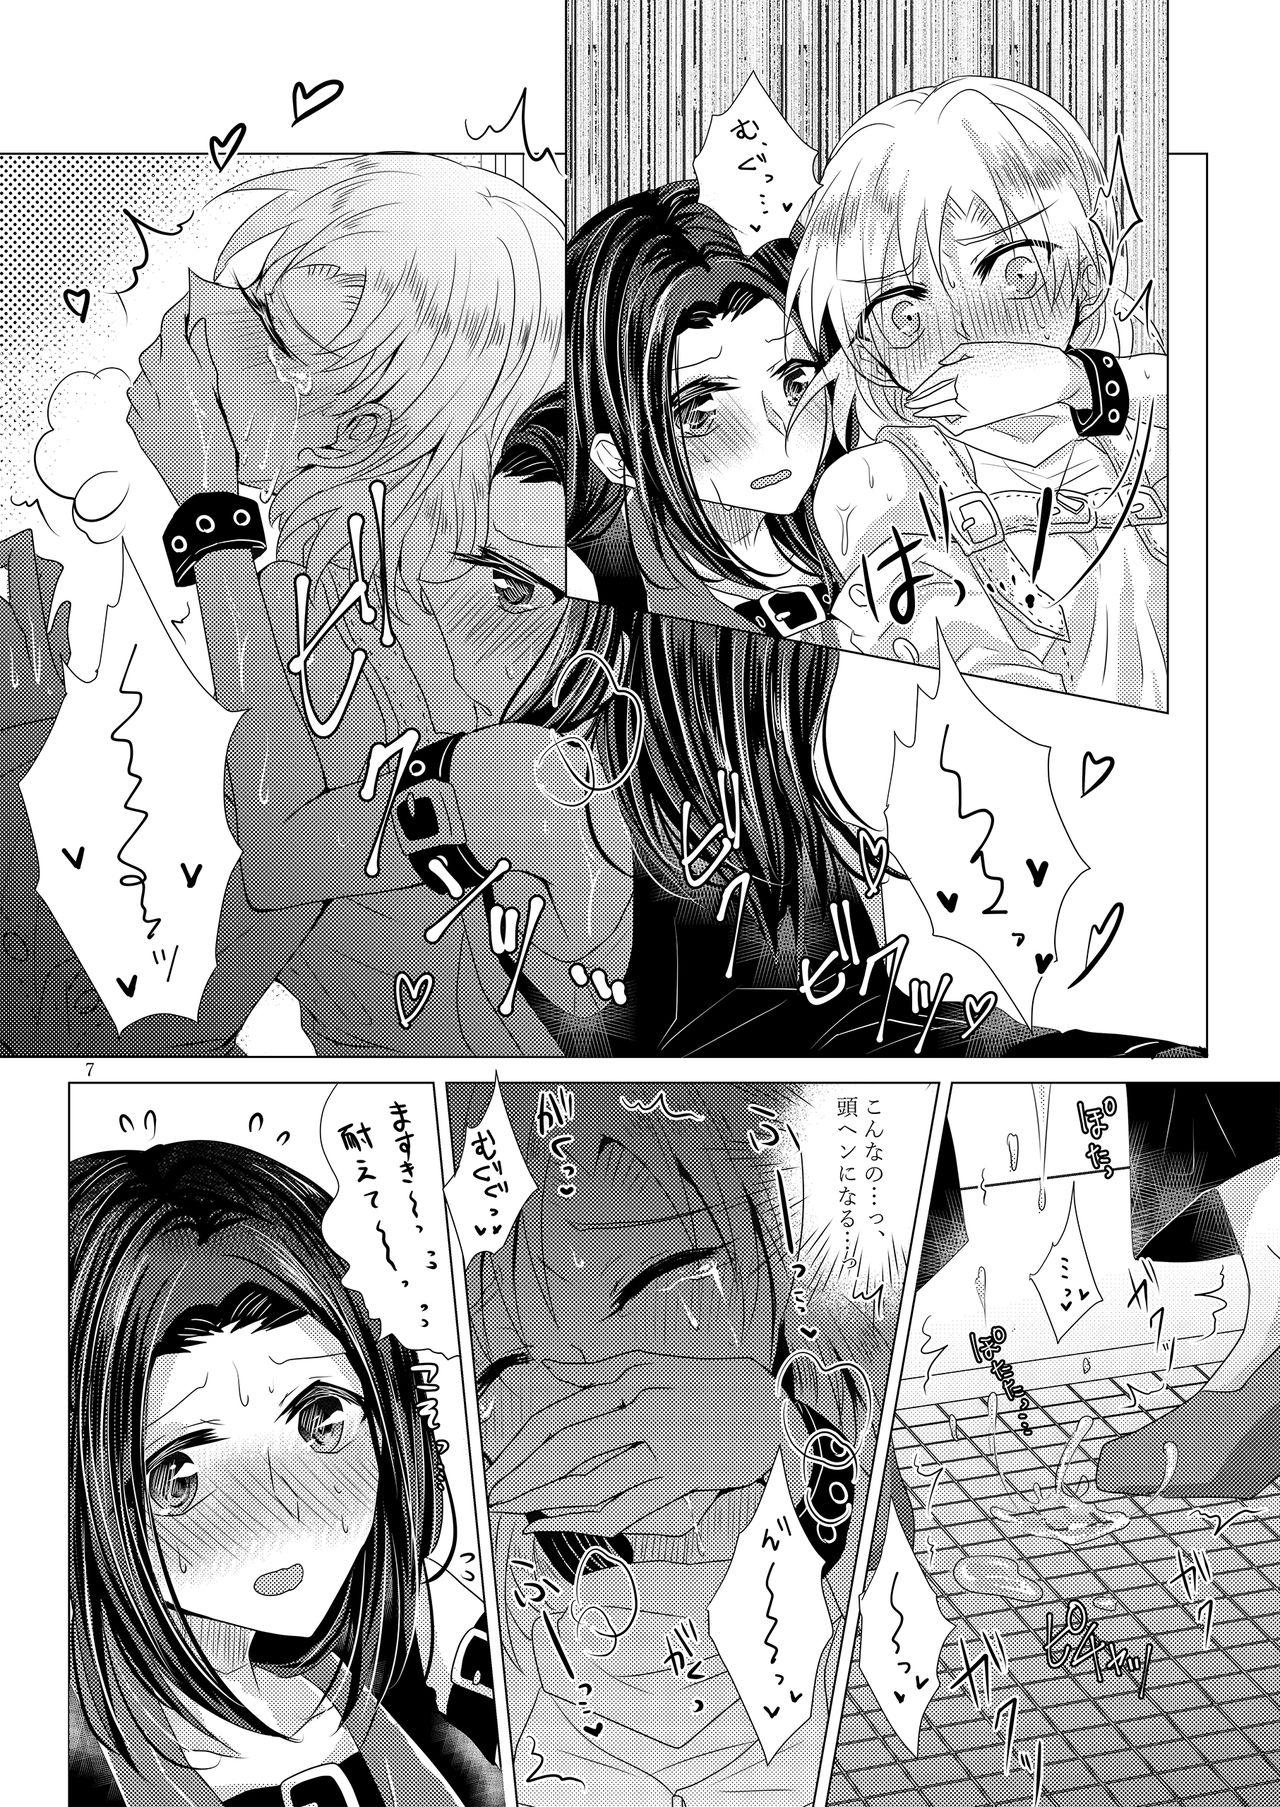 Perfect Butt Feeling High & Satisfied - Bang dream Old And Young - Page 6